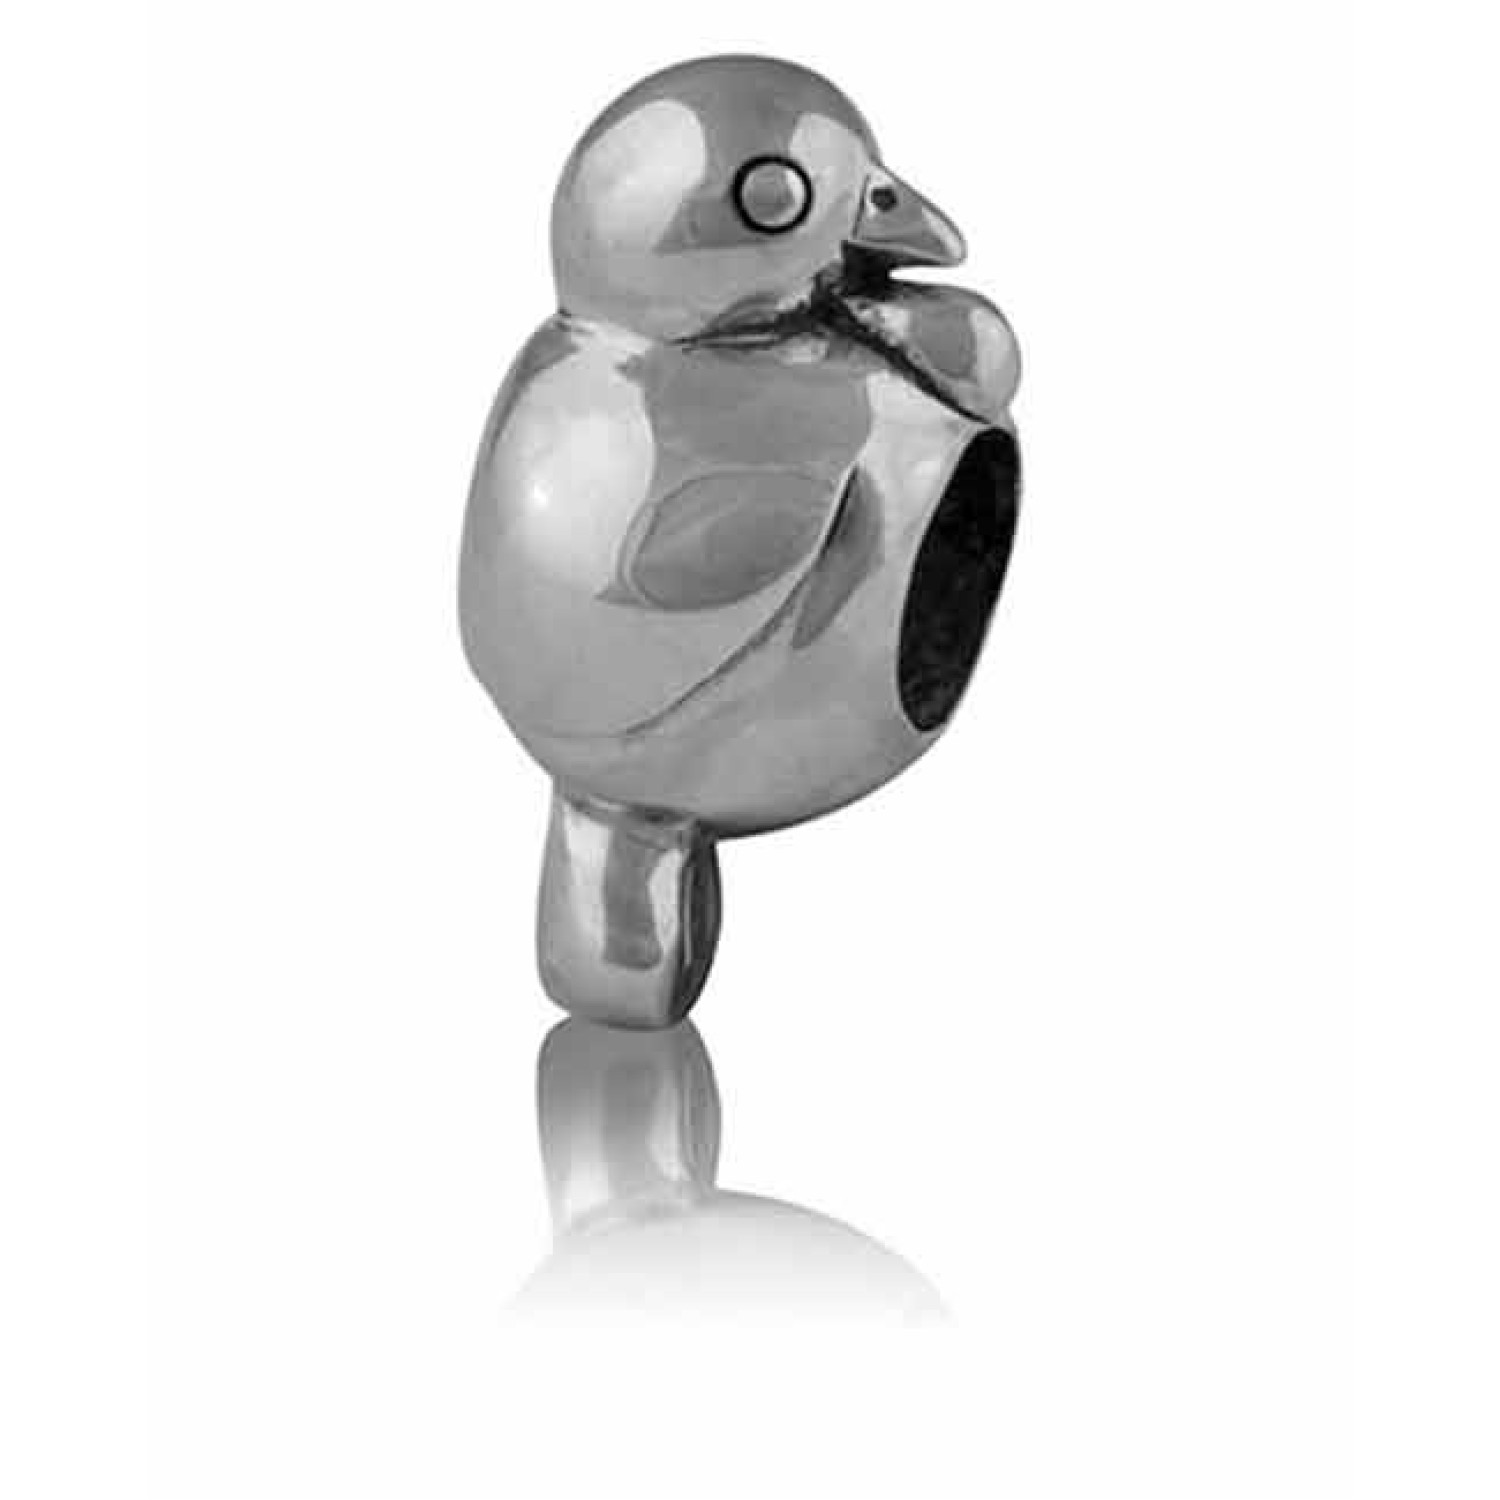 LK131 Evolve Charms NZ Tui. This charm celebrates New Zealand’s unique and endangered mountain parrot, the kea, considered one of the most intelligent birds in the world.  Notorious for their cheeky and inquisitive nature, kea are affect @christies.online